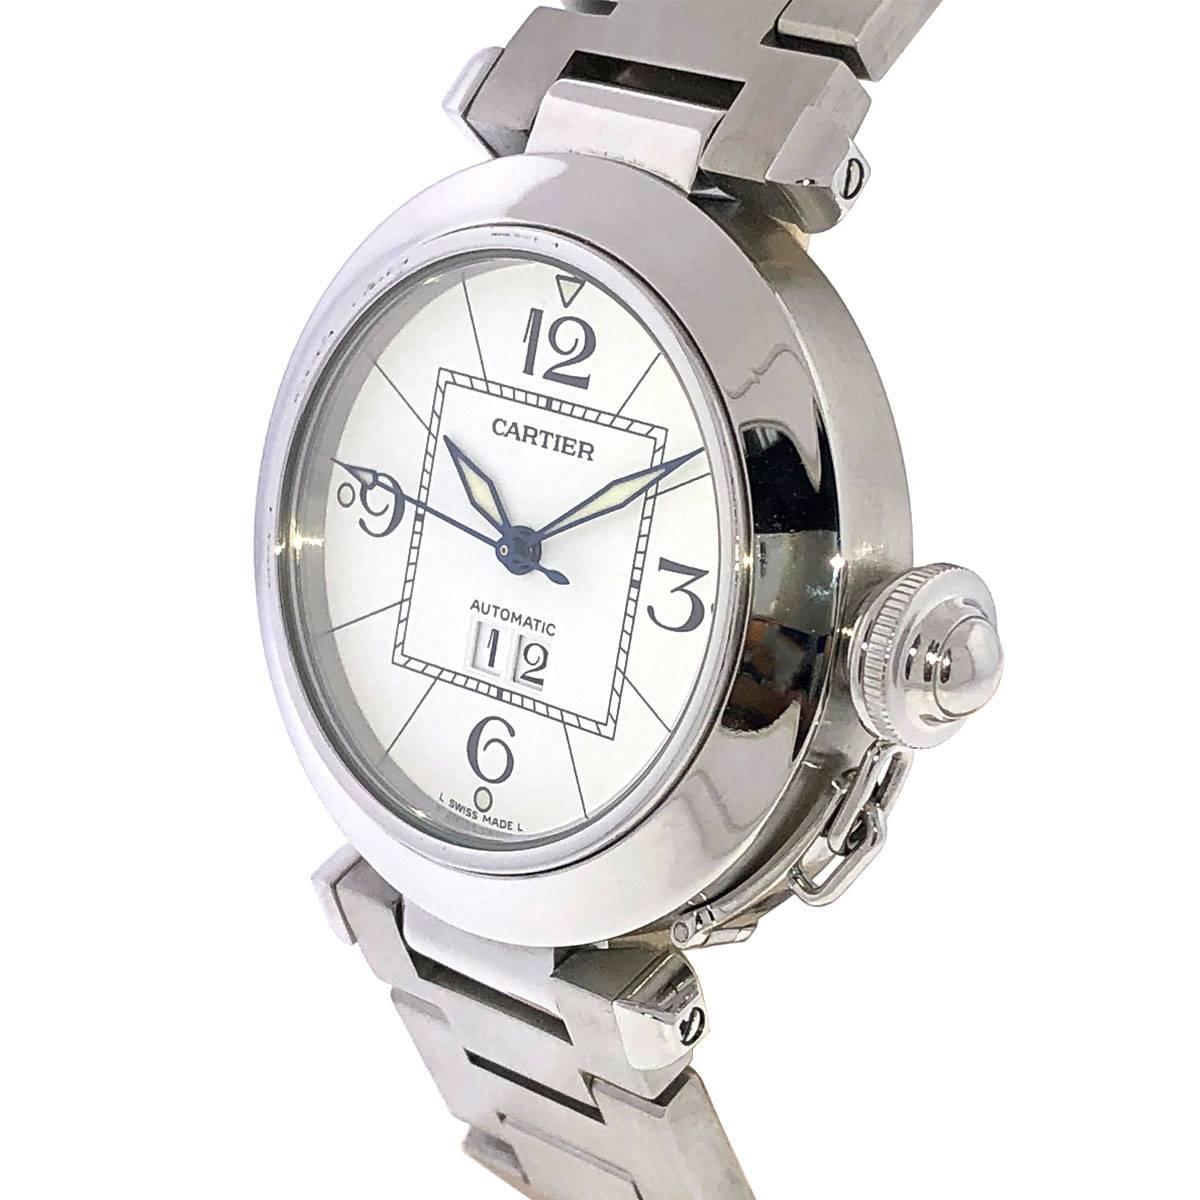 Company - Cartier
Style - Dress
Model - Pasha 
Reference Number - 2475
Case Metal - Stainless Steel
Case Measurement - 35mm 
Bracelet - Stainless Steel - Fits a 5 1/2